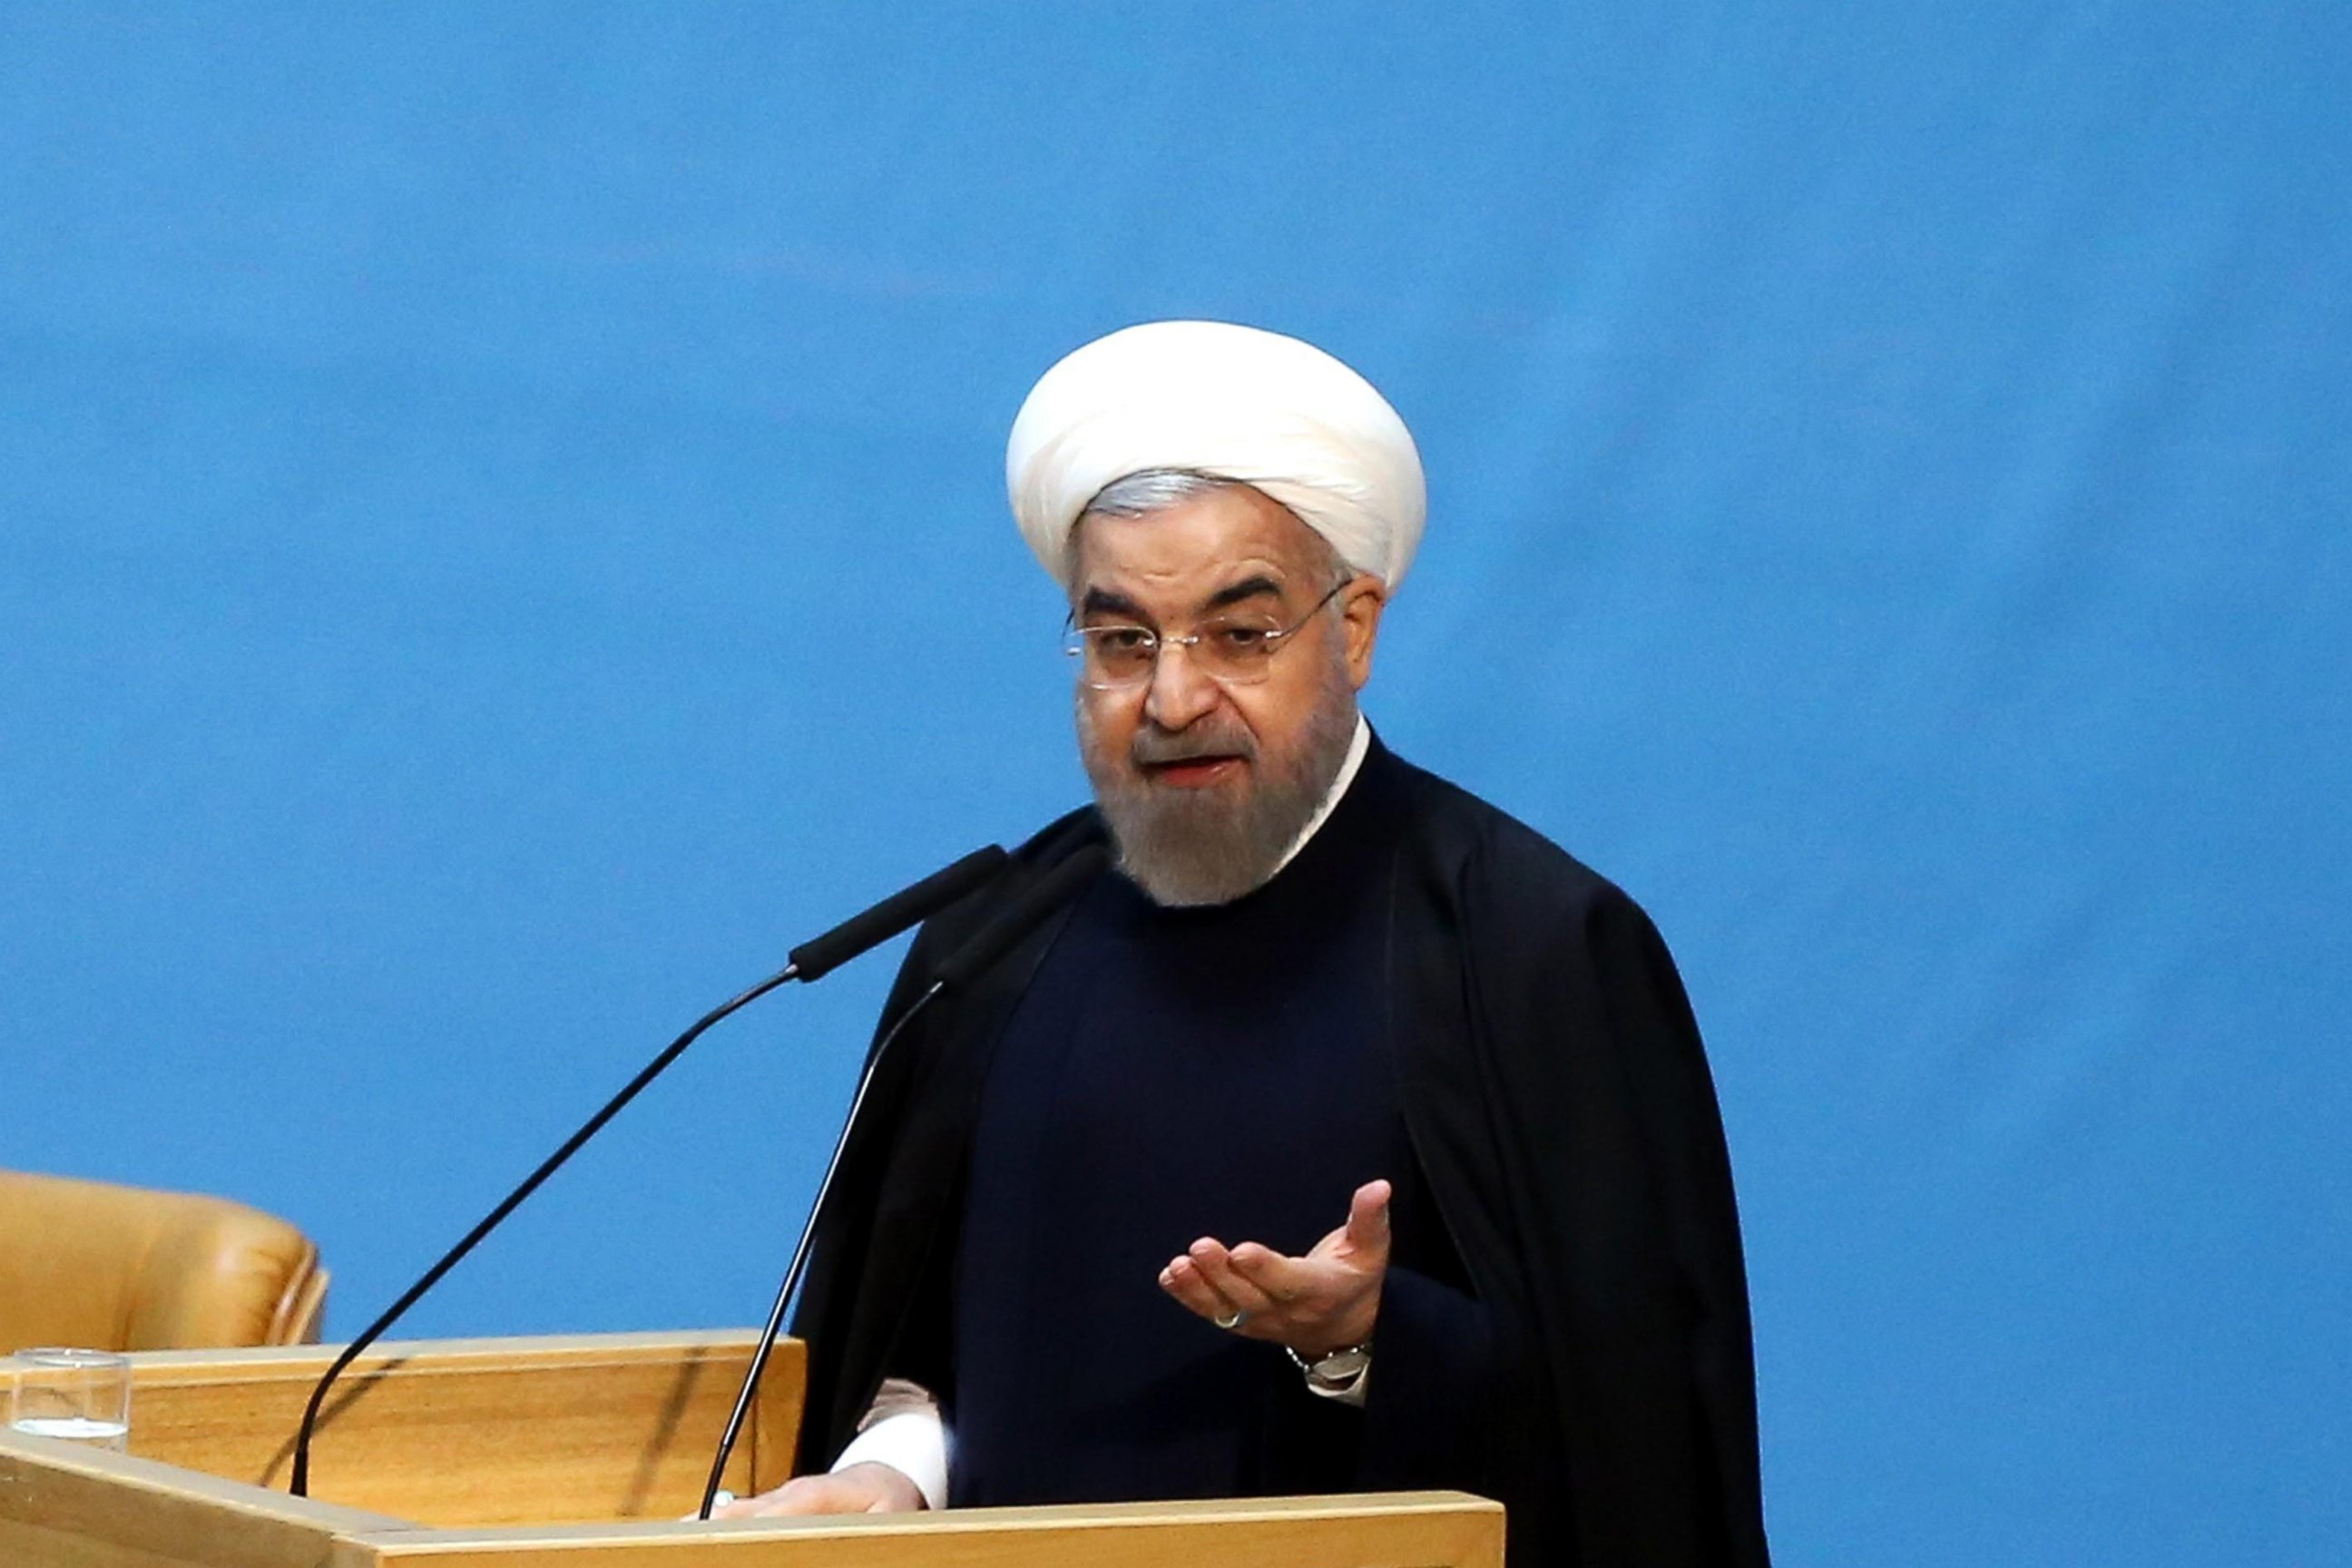 PHOTO: Iranian President Hassan Rouhani speaks during the opening ceremony of Iran's national economy conference in Tehran on Jan. 4, 2015.